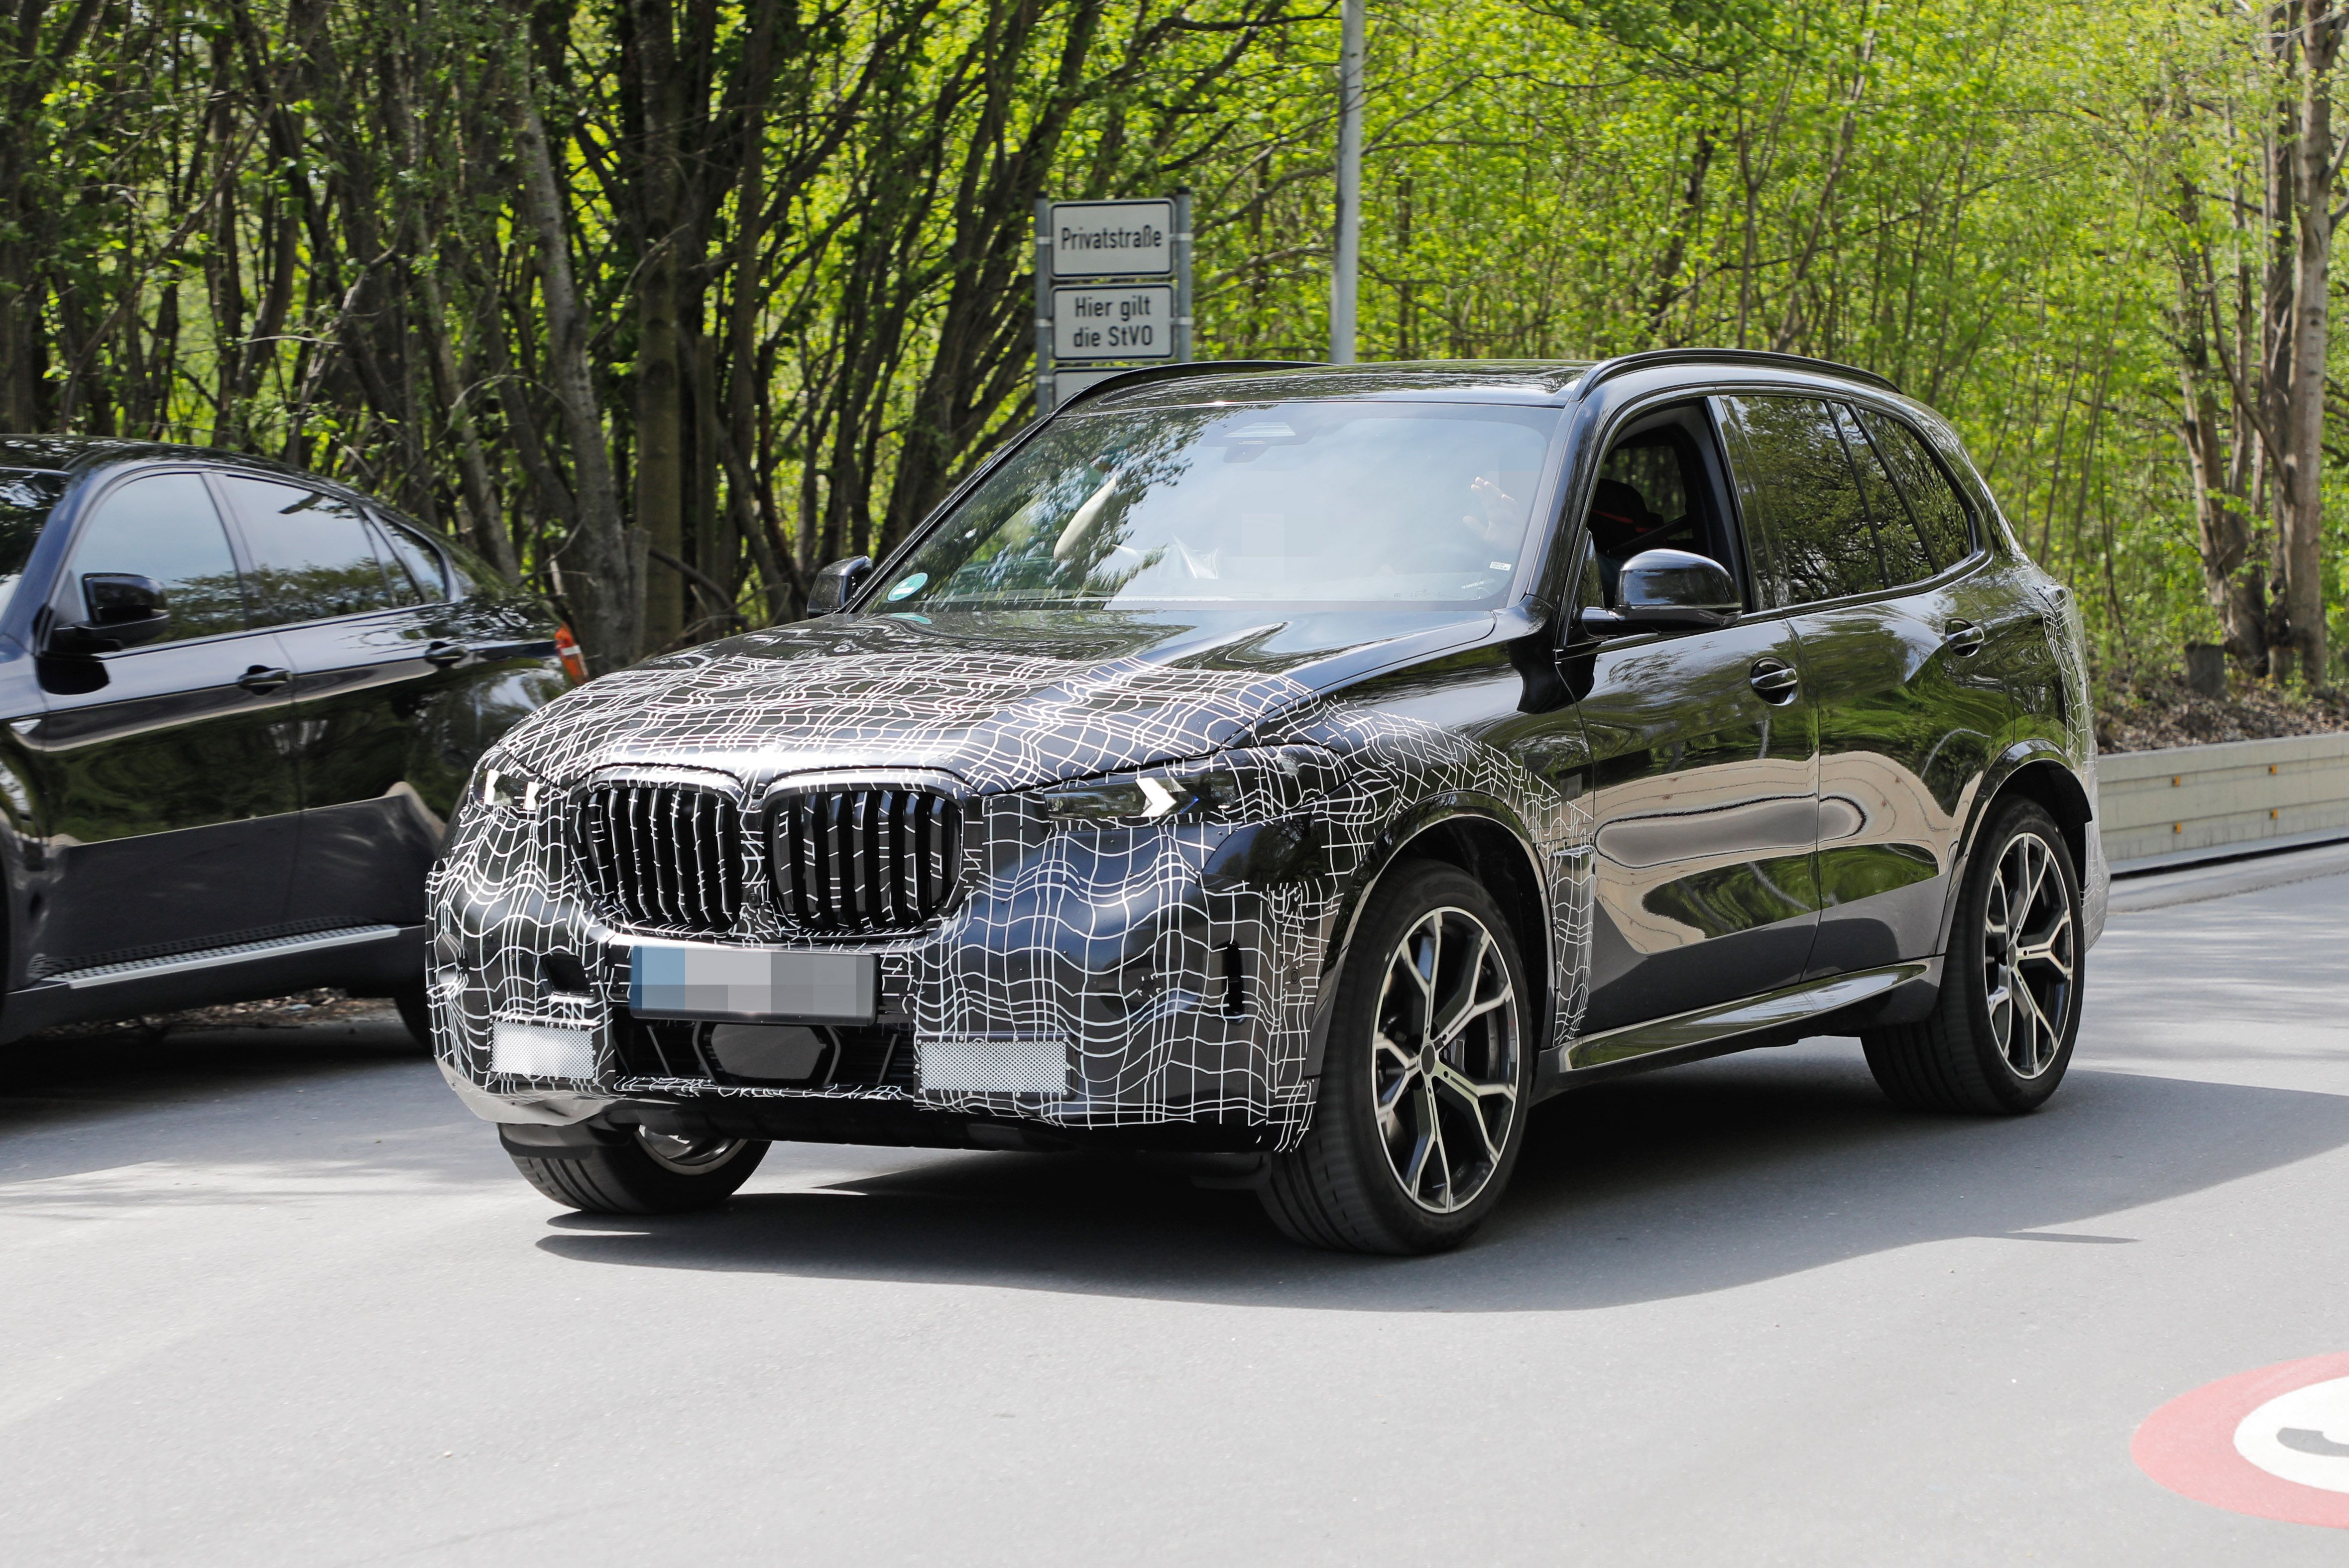 The Latest 2023 BMW X5 Facelift Spy Shots Reveal New Details - Are